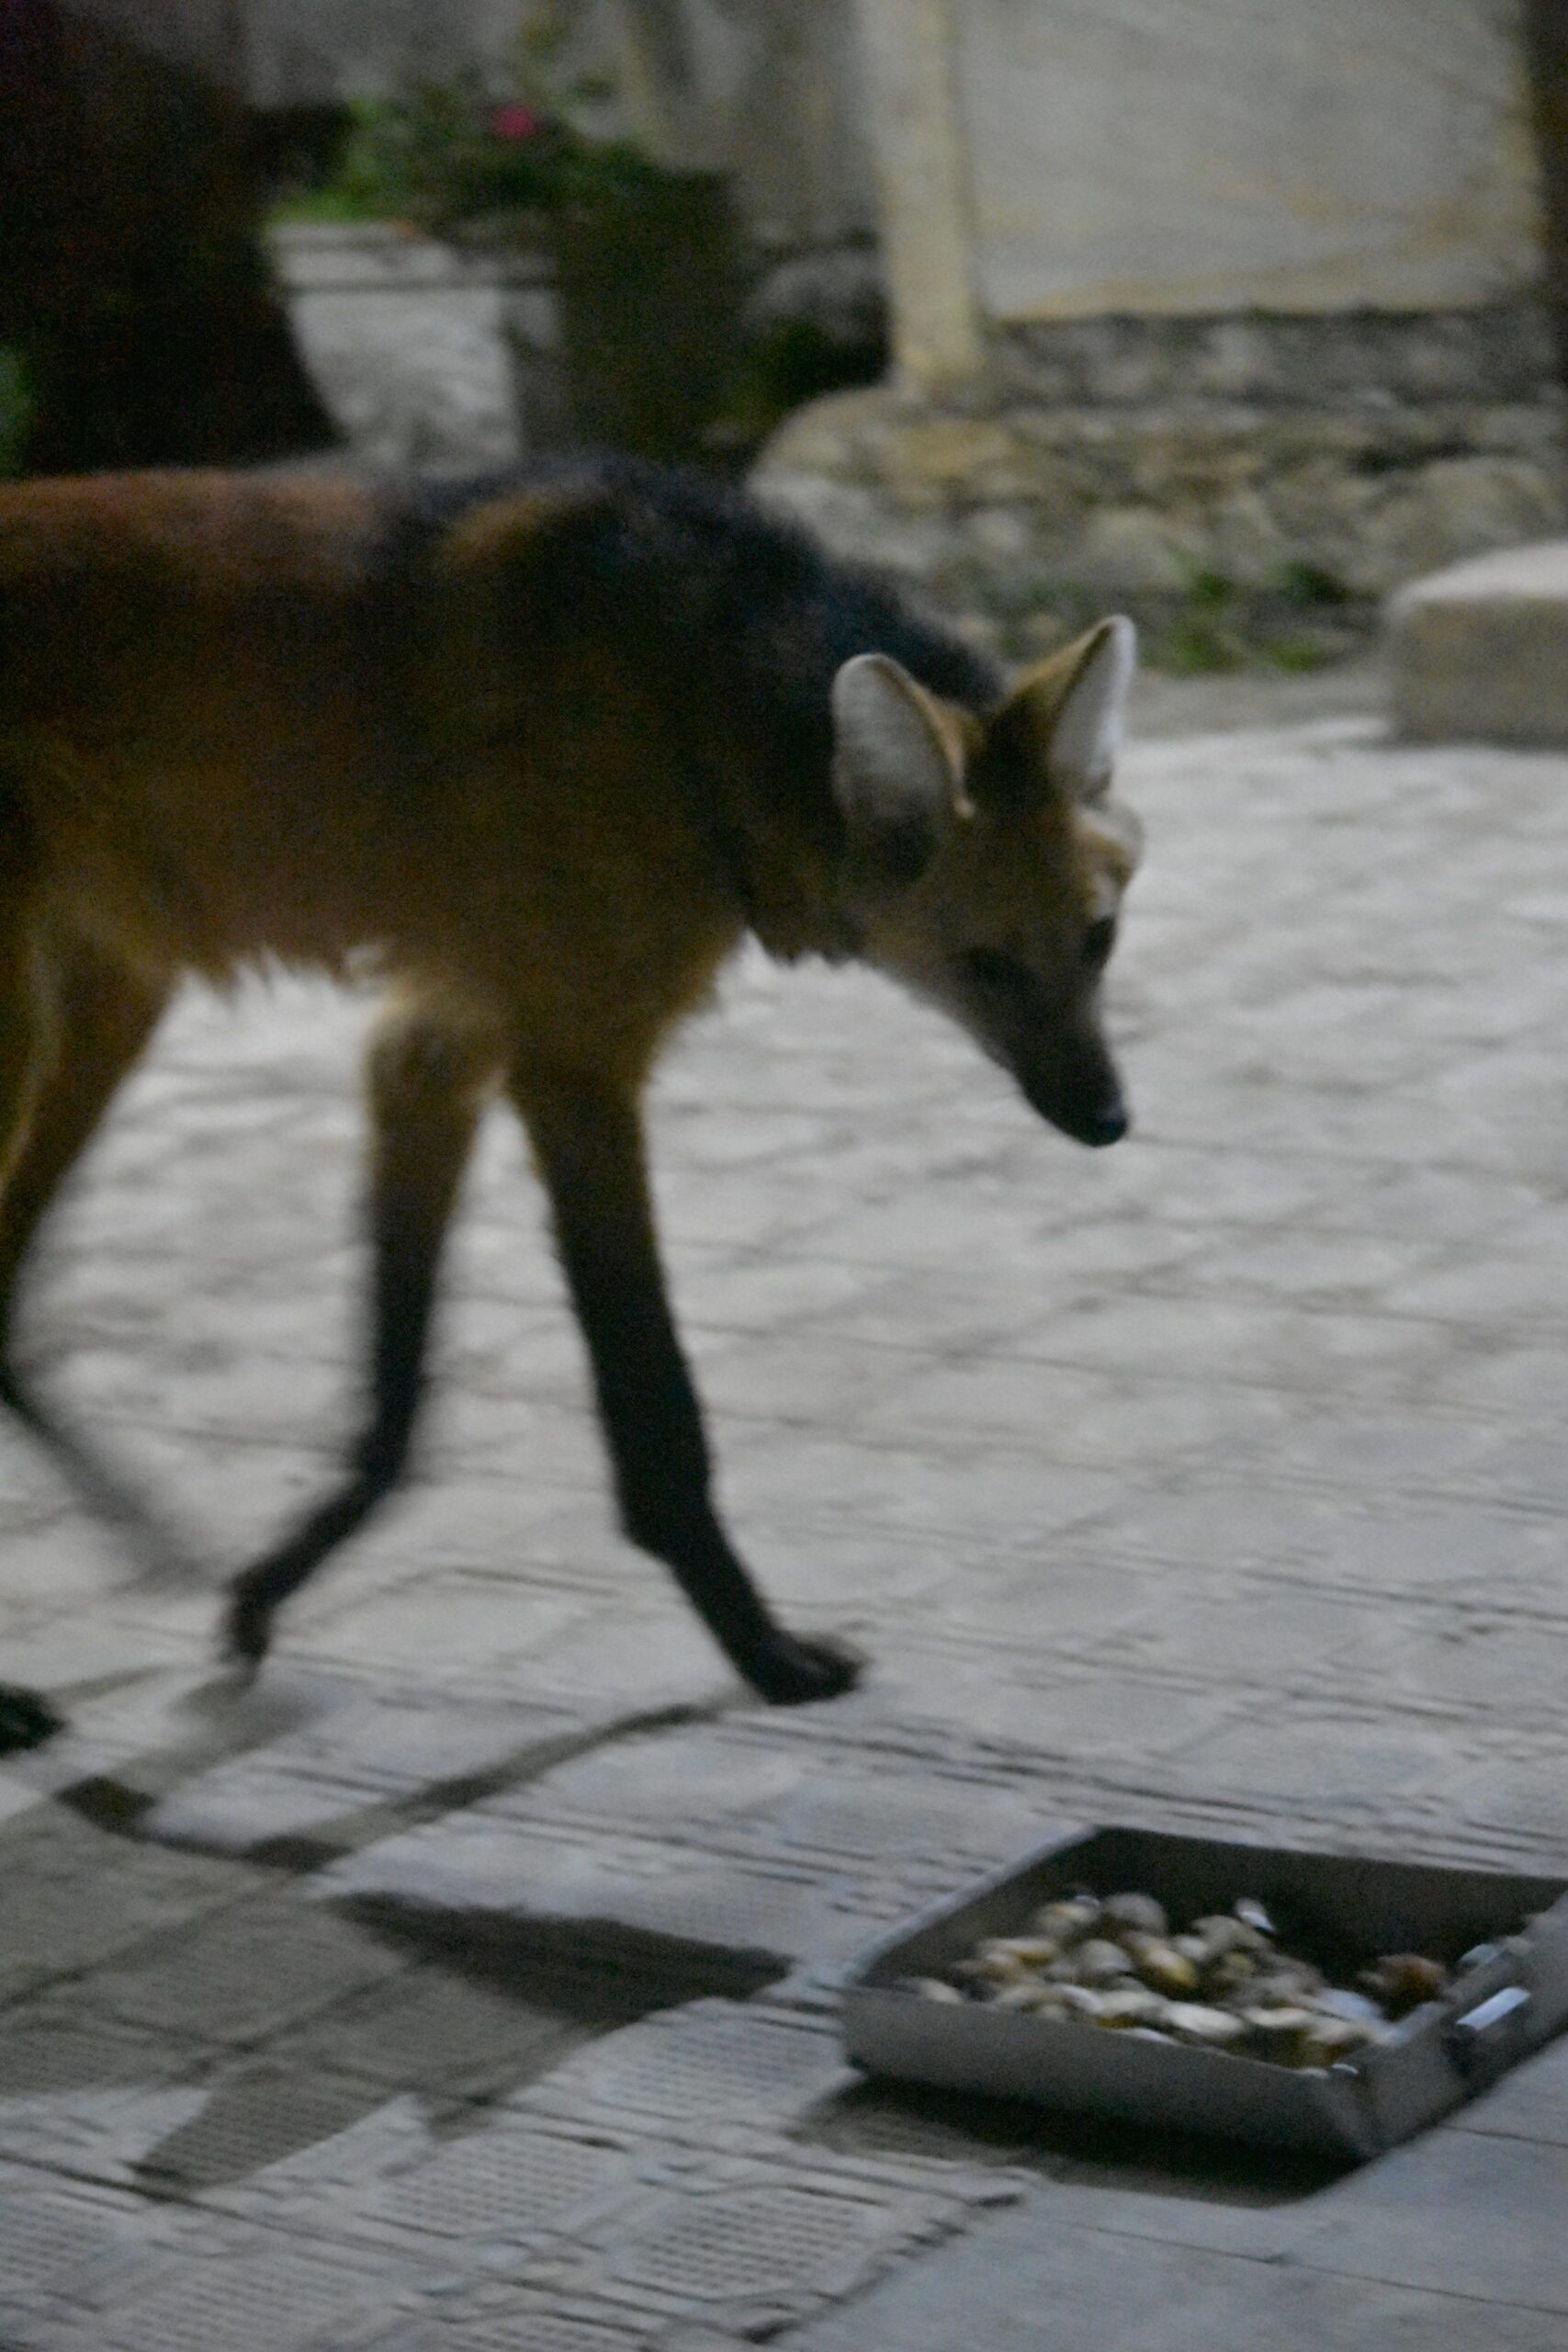 A maned wolf approaches the tray